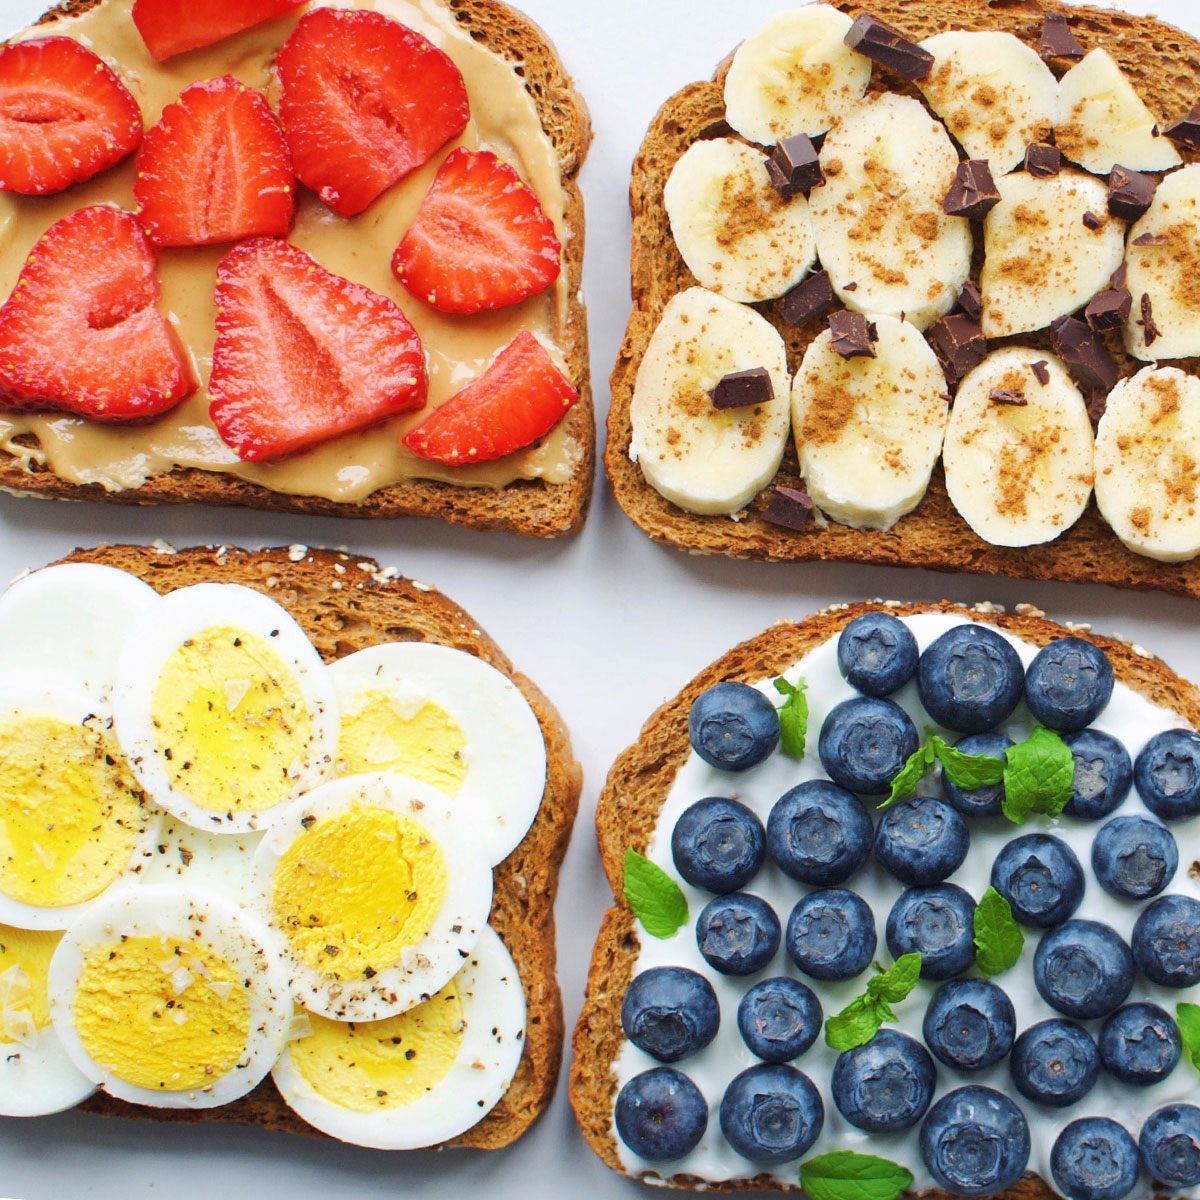 Toast with various ingredients including eggs, nut butters and fruit